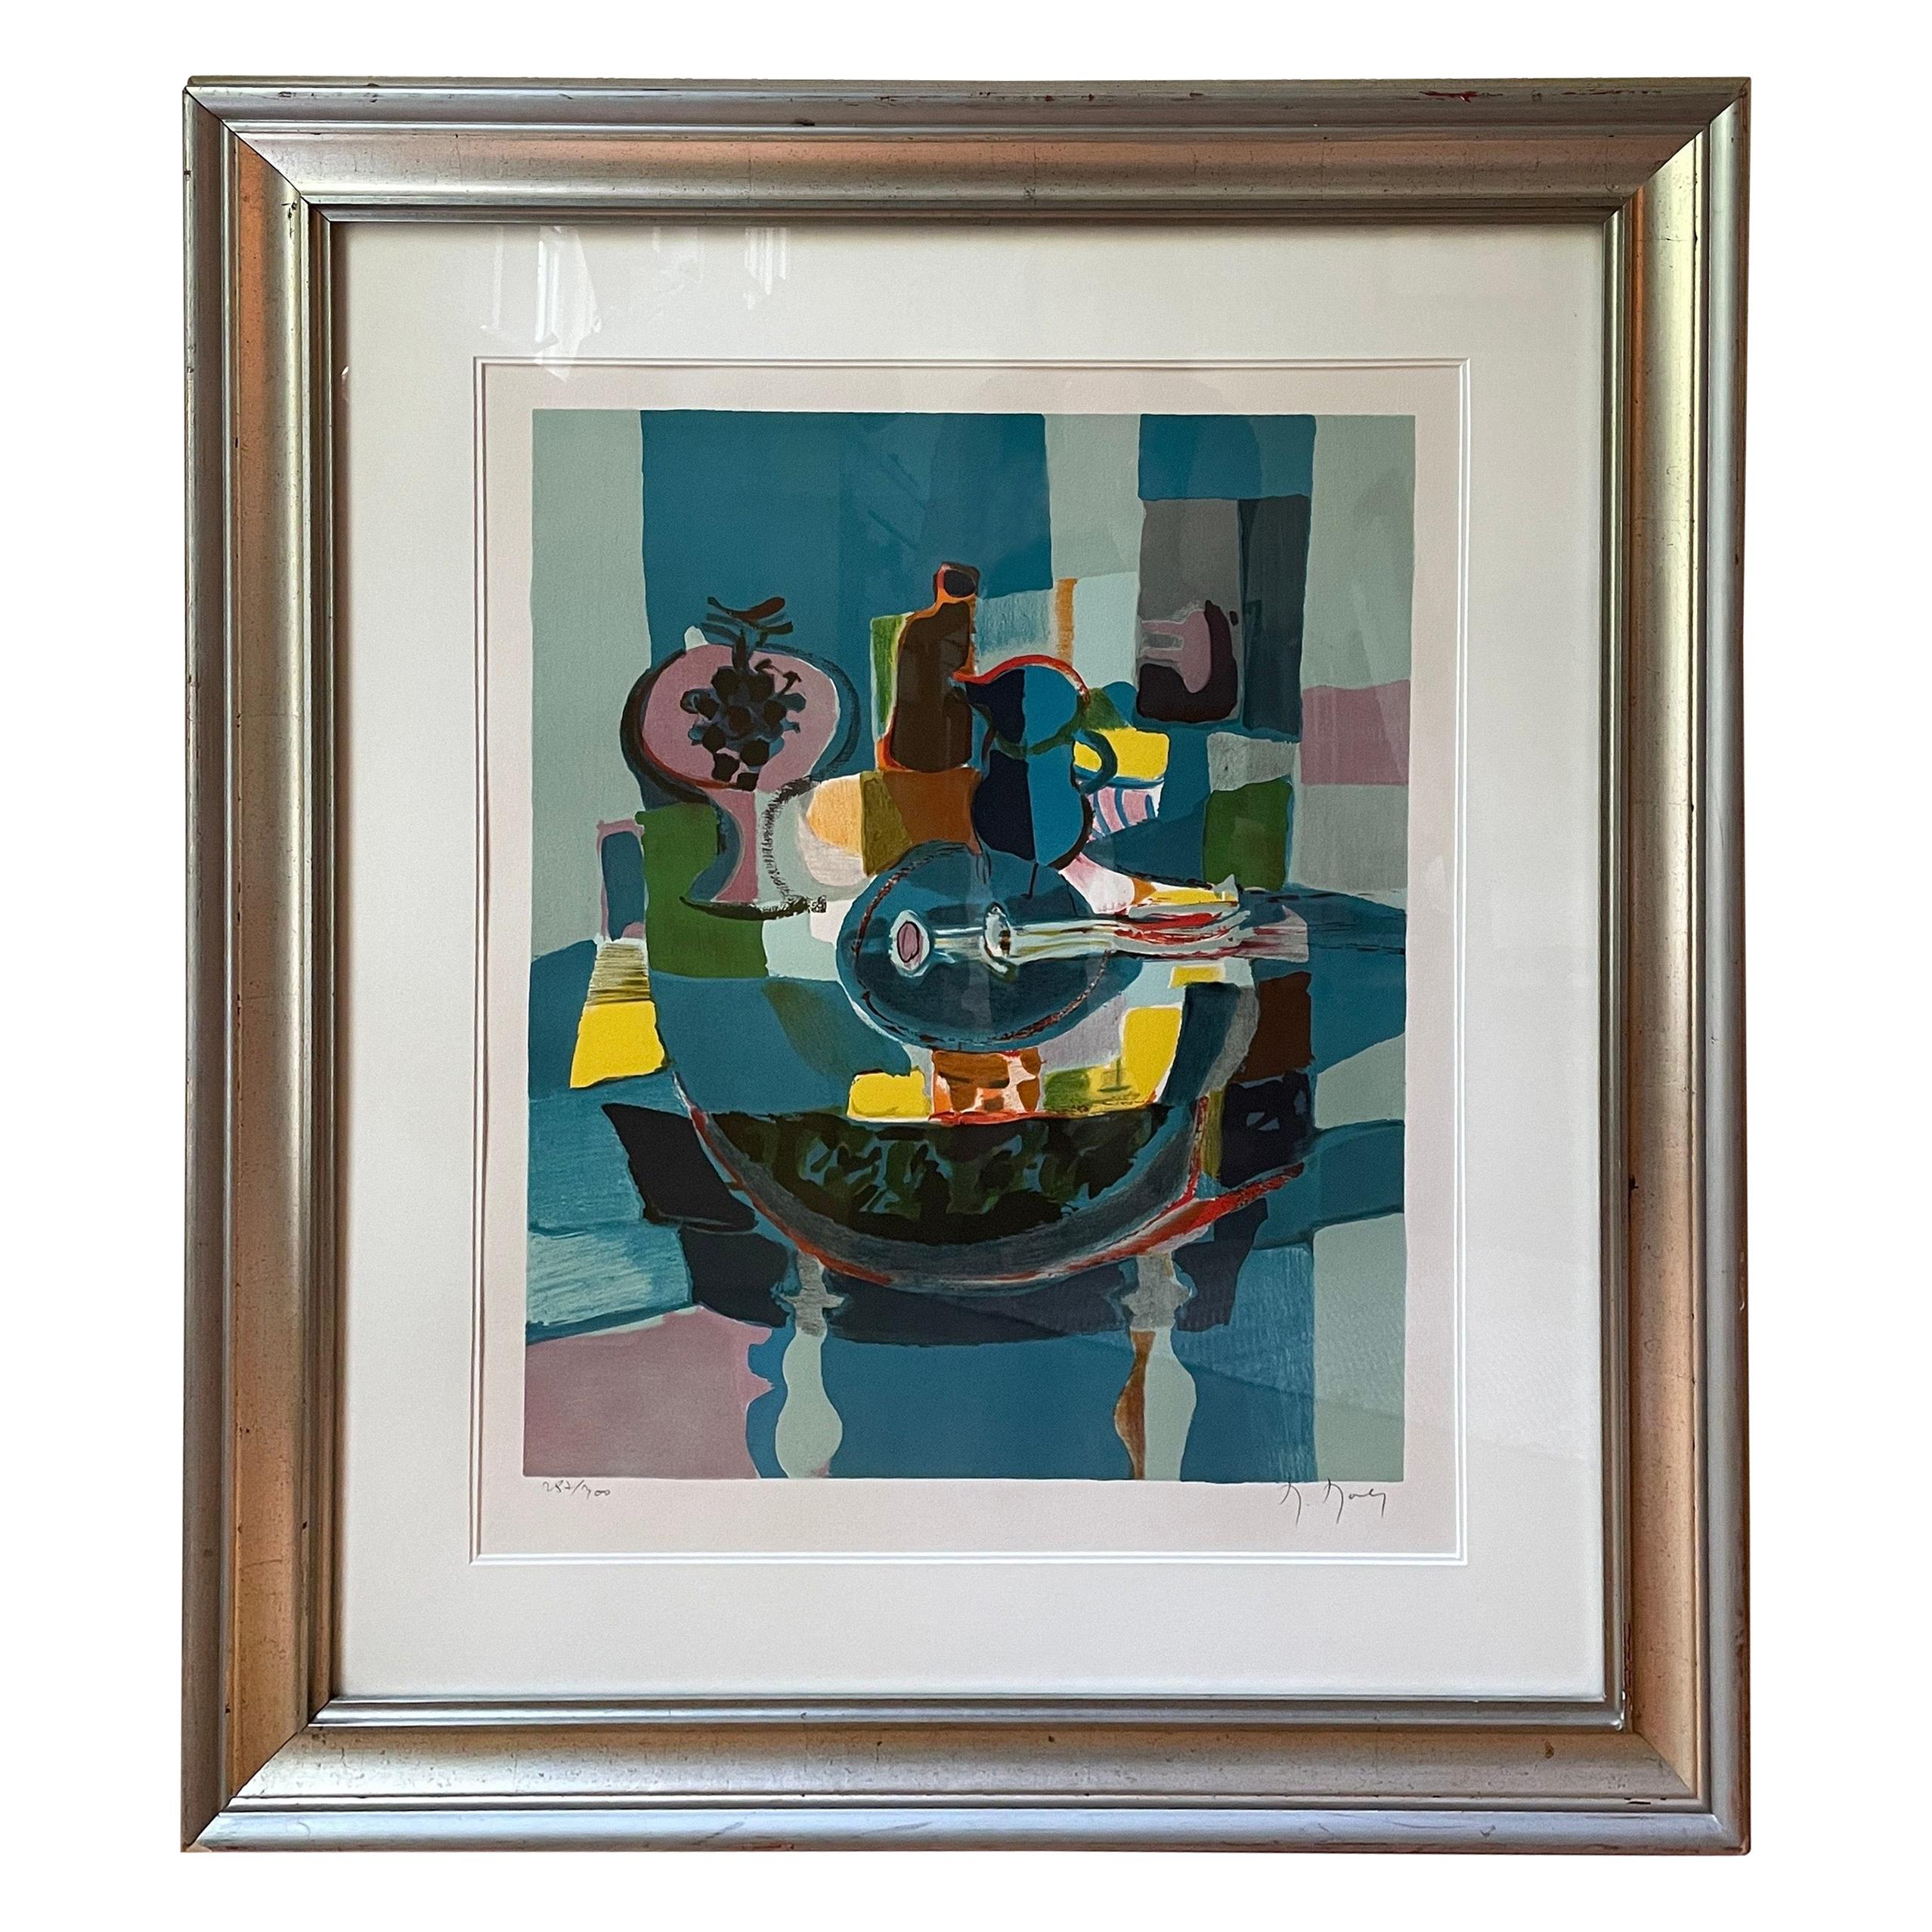 Marcel Mouly Signed and Numbered Lithograph “Les Mandolin’s en Bleus”